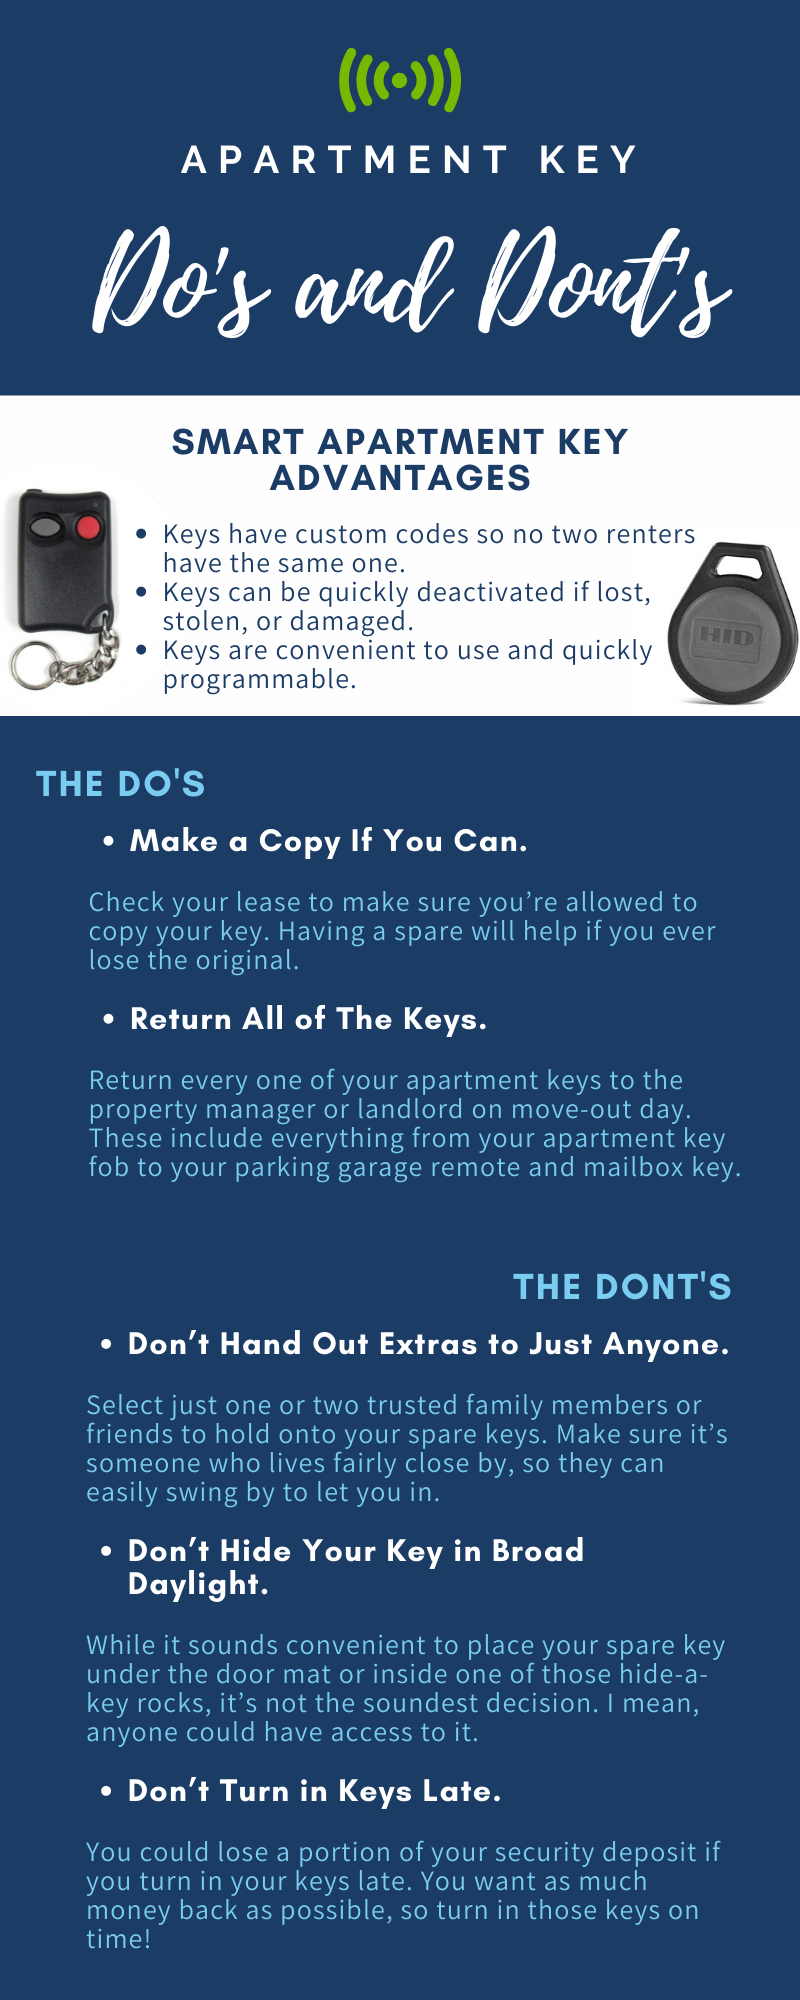 Property management rental advice and tips for access and key fob entry infographic